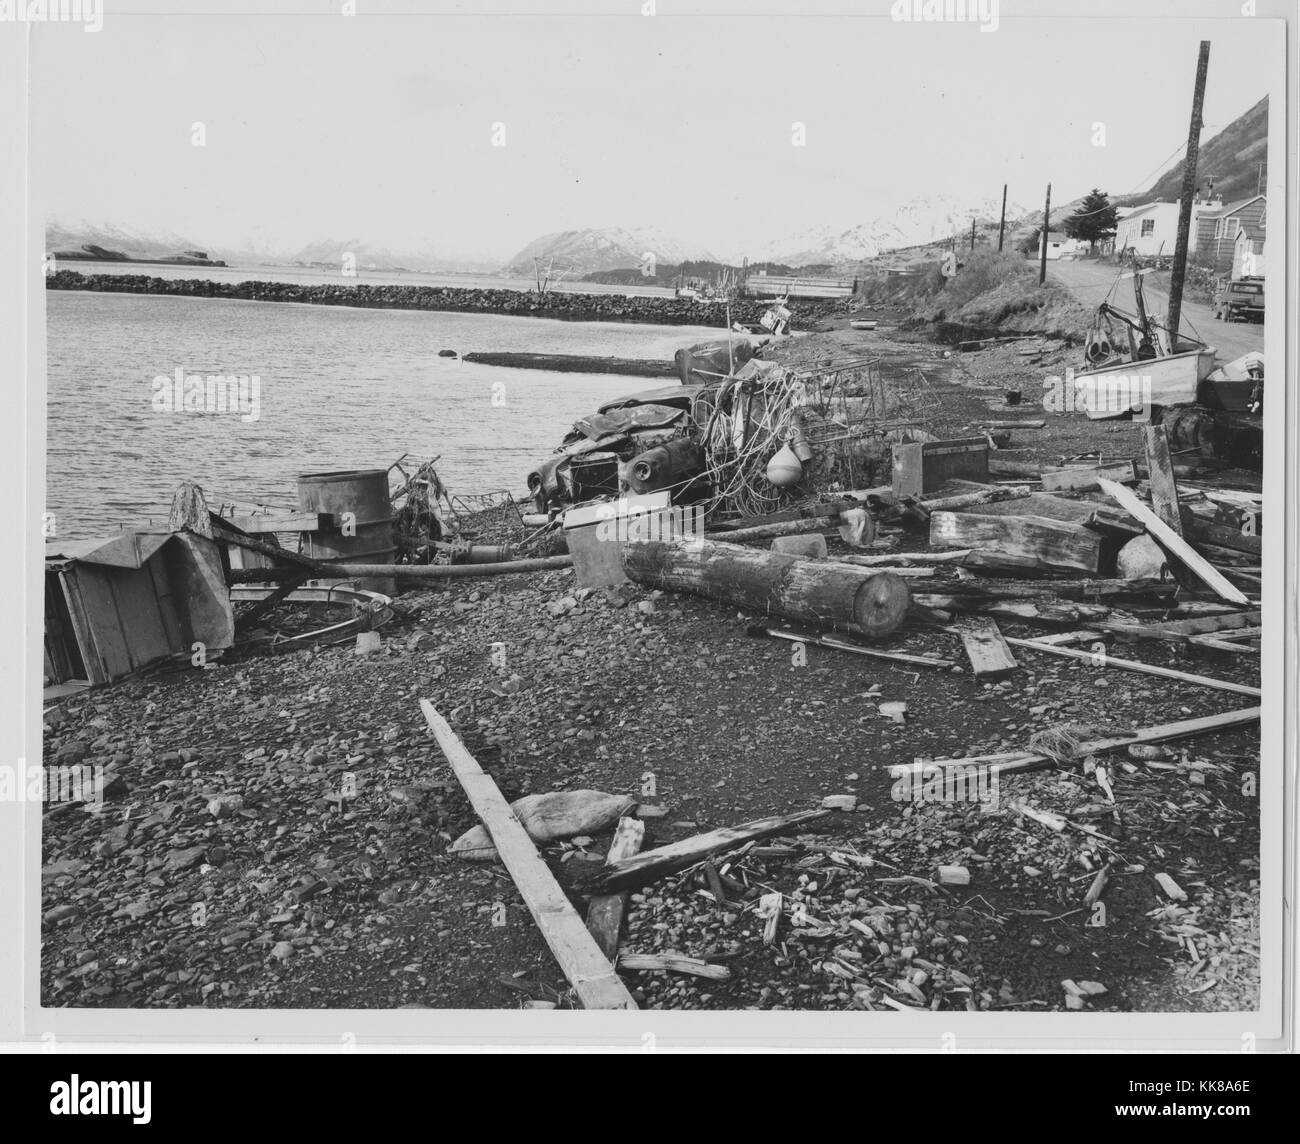 A photograph of debris left along the water after the 1964 Alaska earthquake, the debris was deposited after the water from the tsunami caused by the earthquake receded, the 92 magnitude earthquake originated in Prince William Sound and is the second largest earthquake ever recorded, Alaska, 1964. Stock Photo